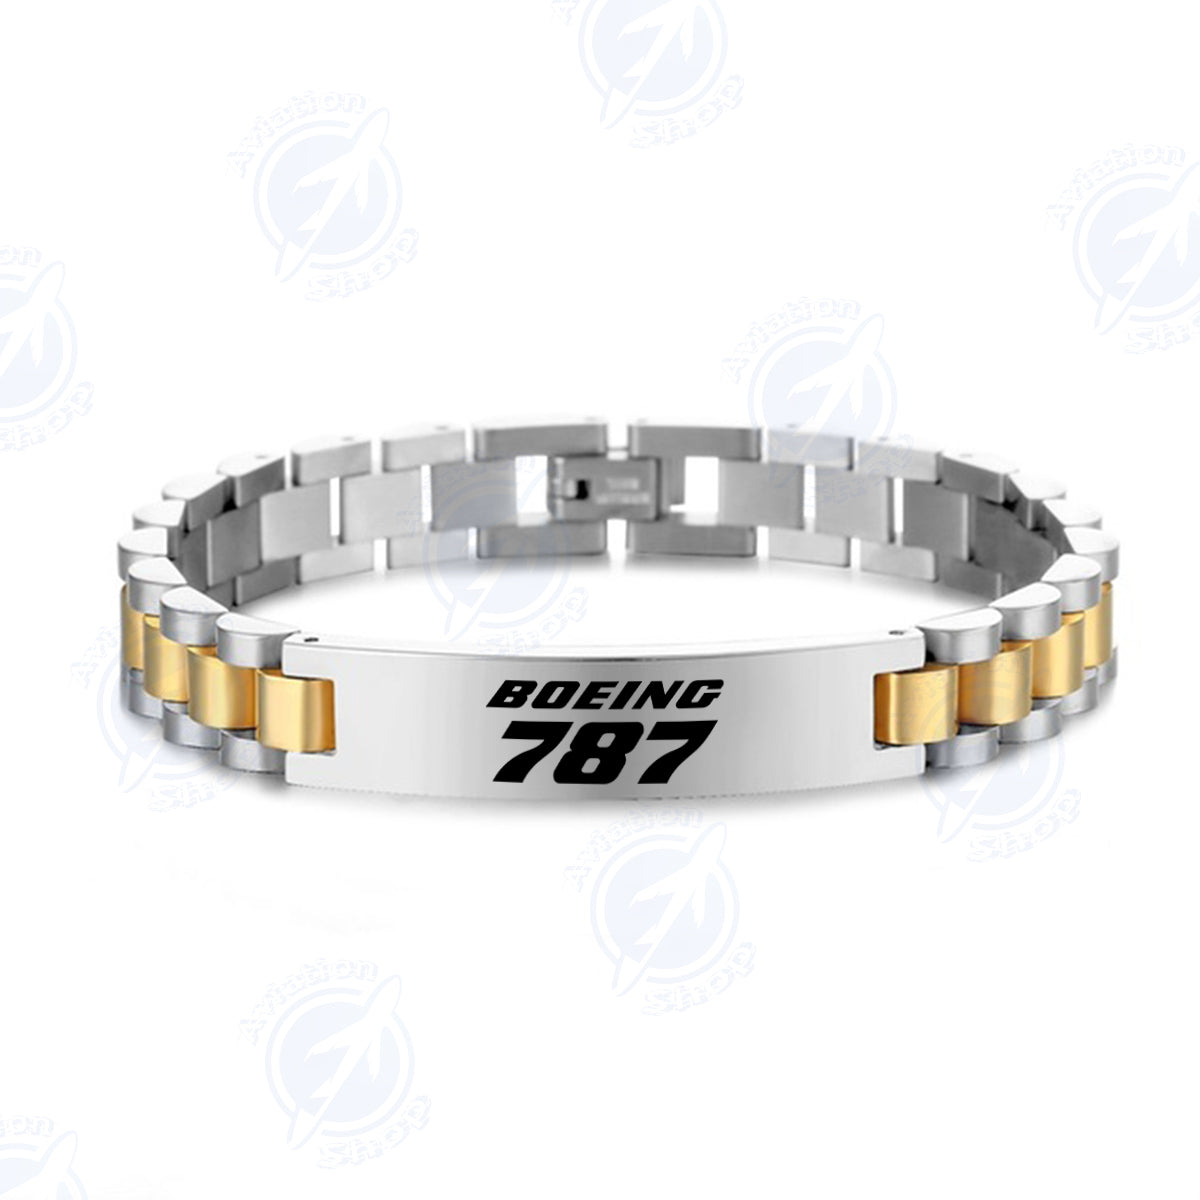 Boeing 787 & Text Designed Stainless Steel Chain Bracelets